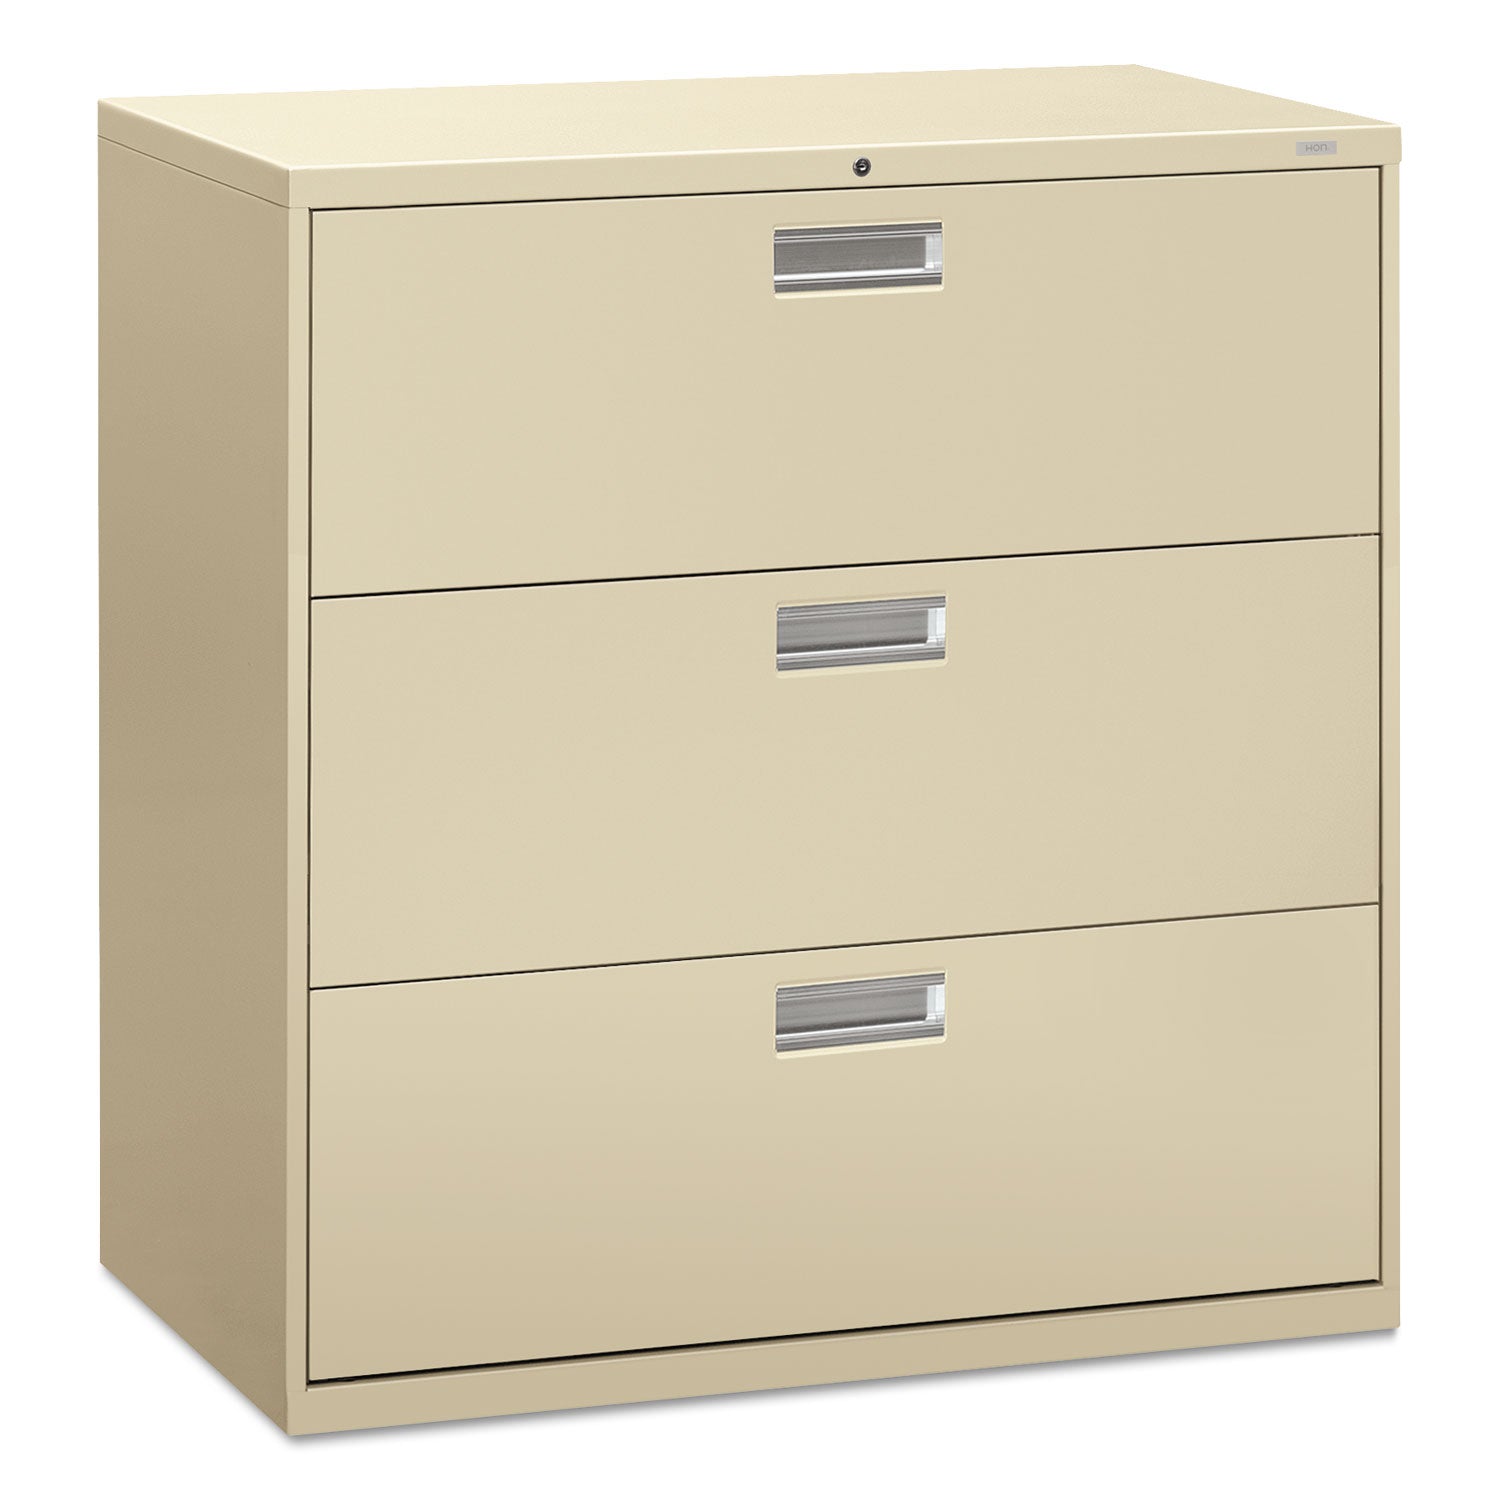 Brigade 600 Series Lateral File, 3 Legal/Letter-Size File Drawers, Putty, 42" x 18" x 39.13 - 